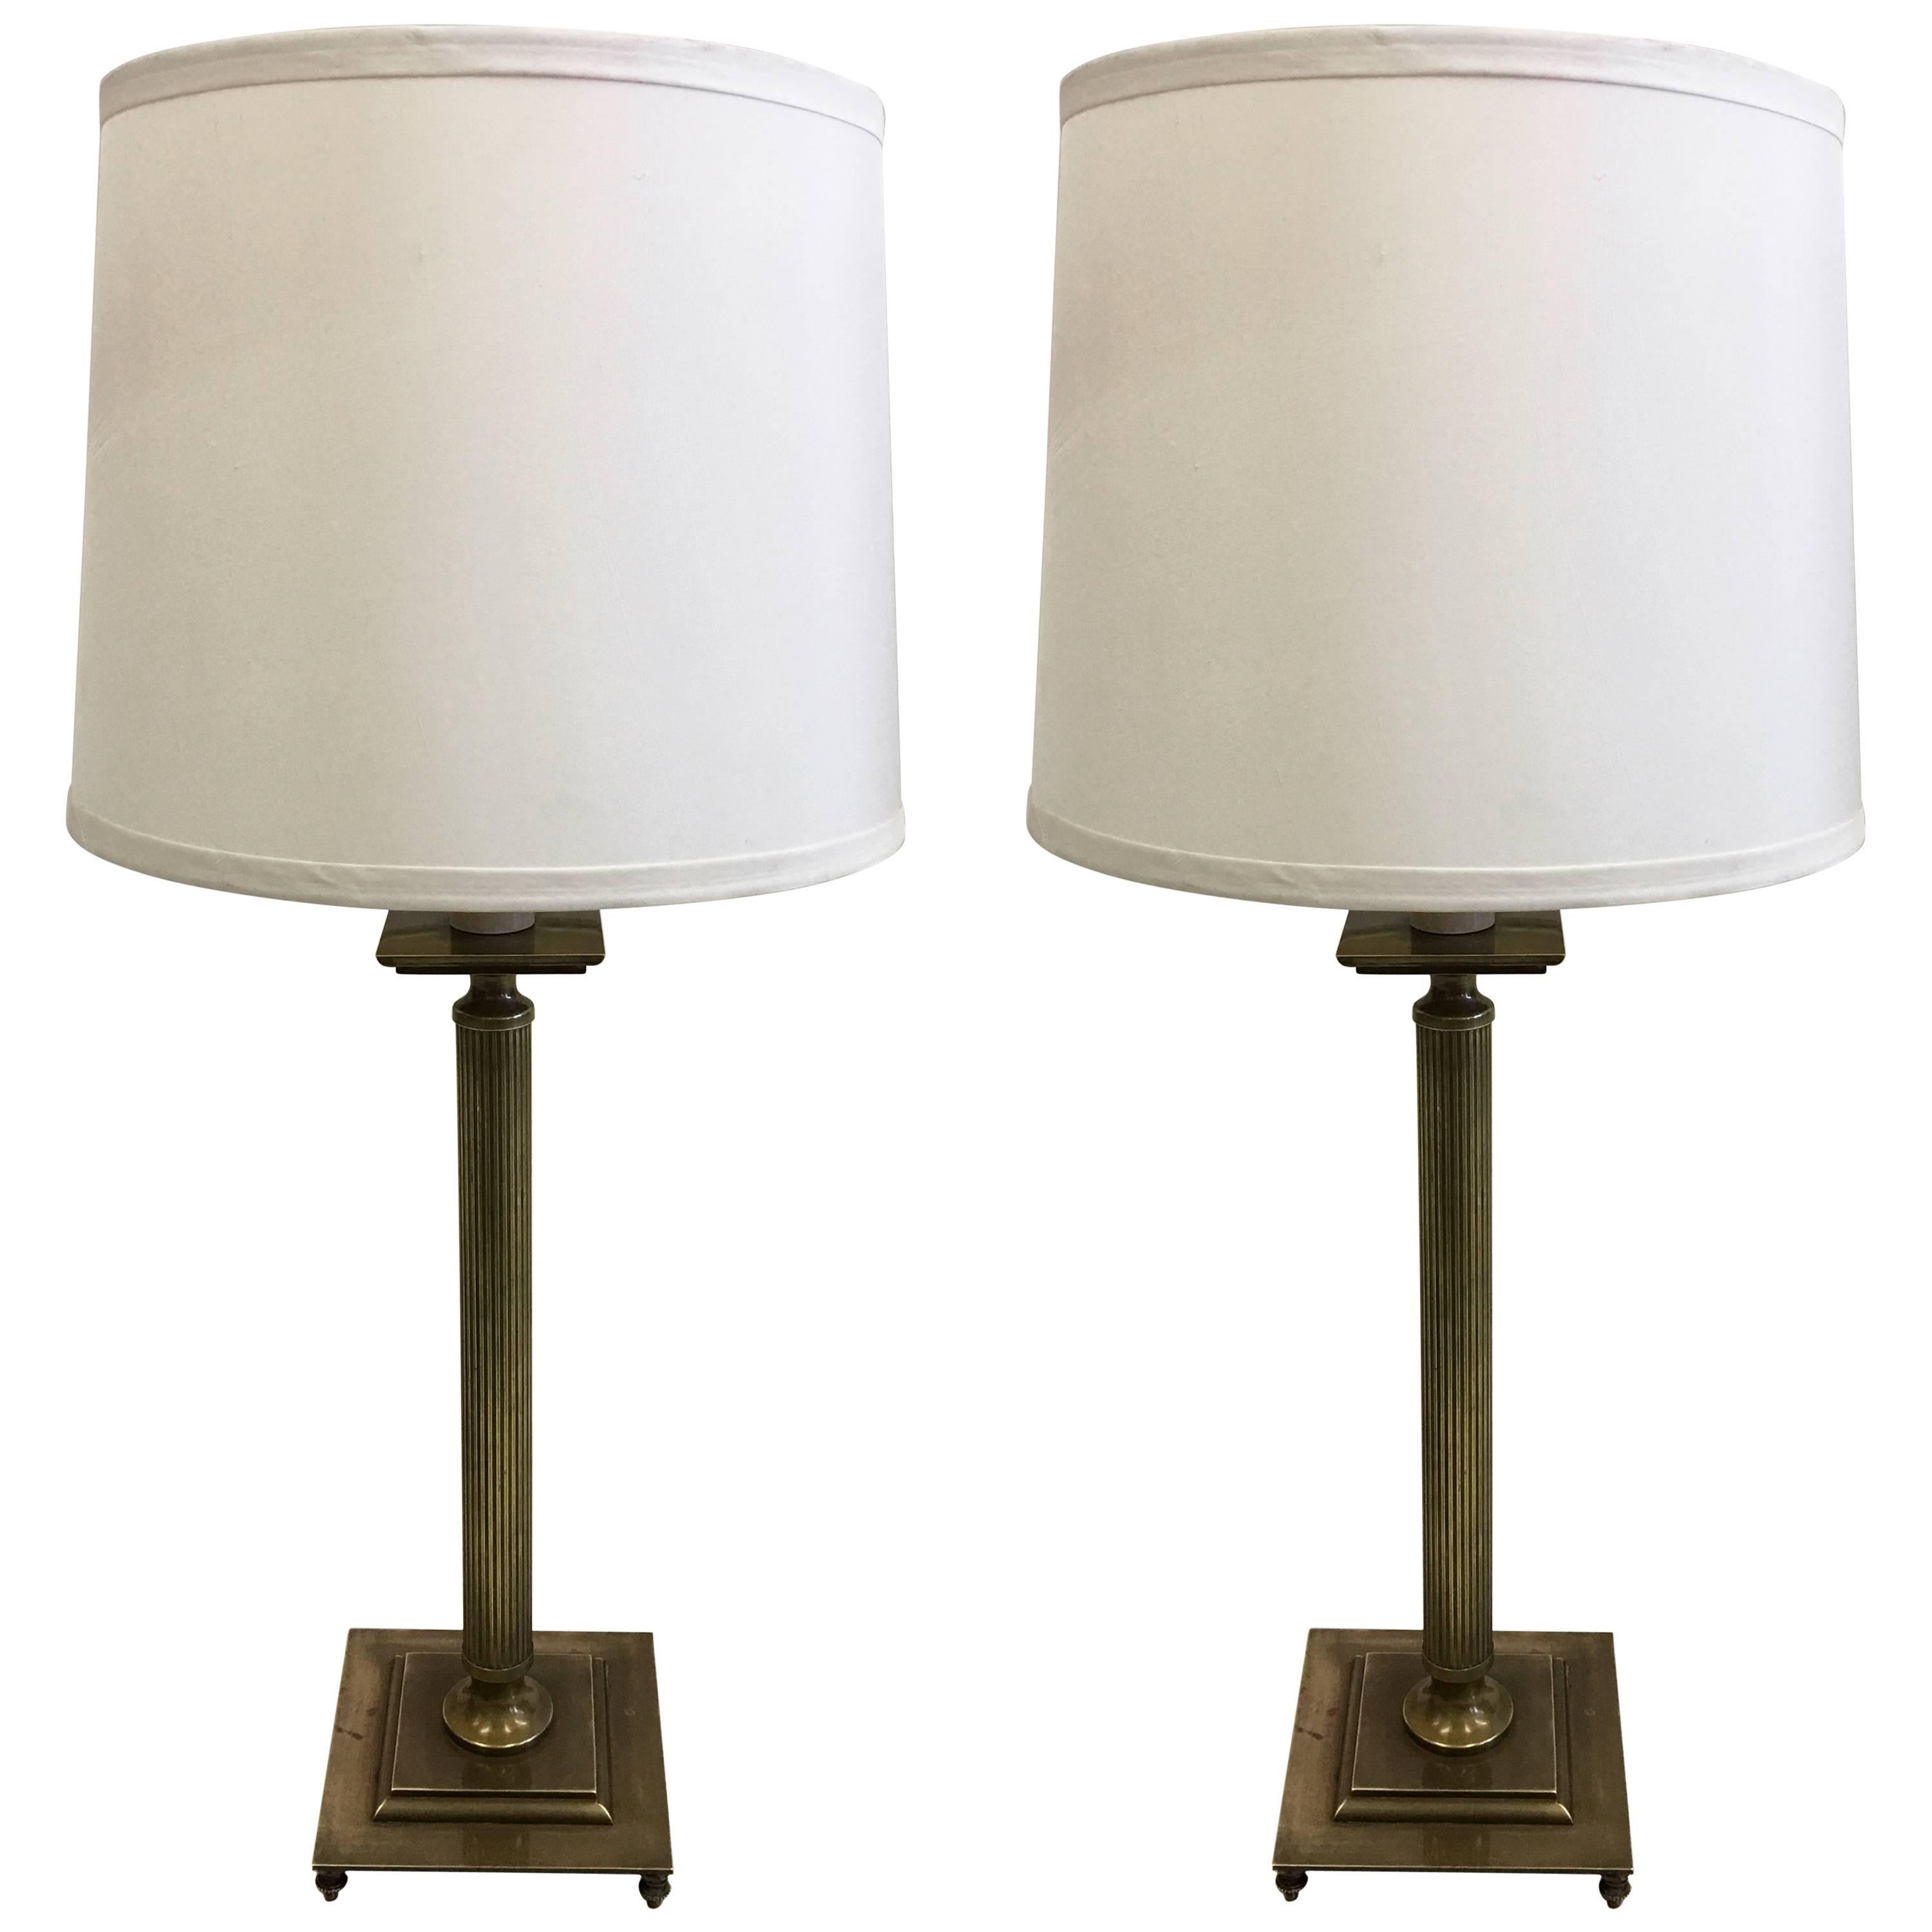 Pair of French Mid-Century Modern Neoclassical Brass Table Lamps, Maison Jansen